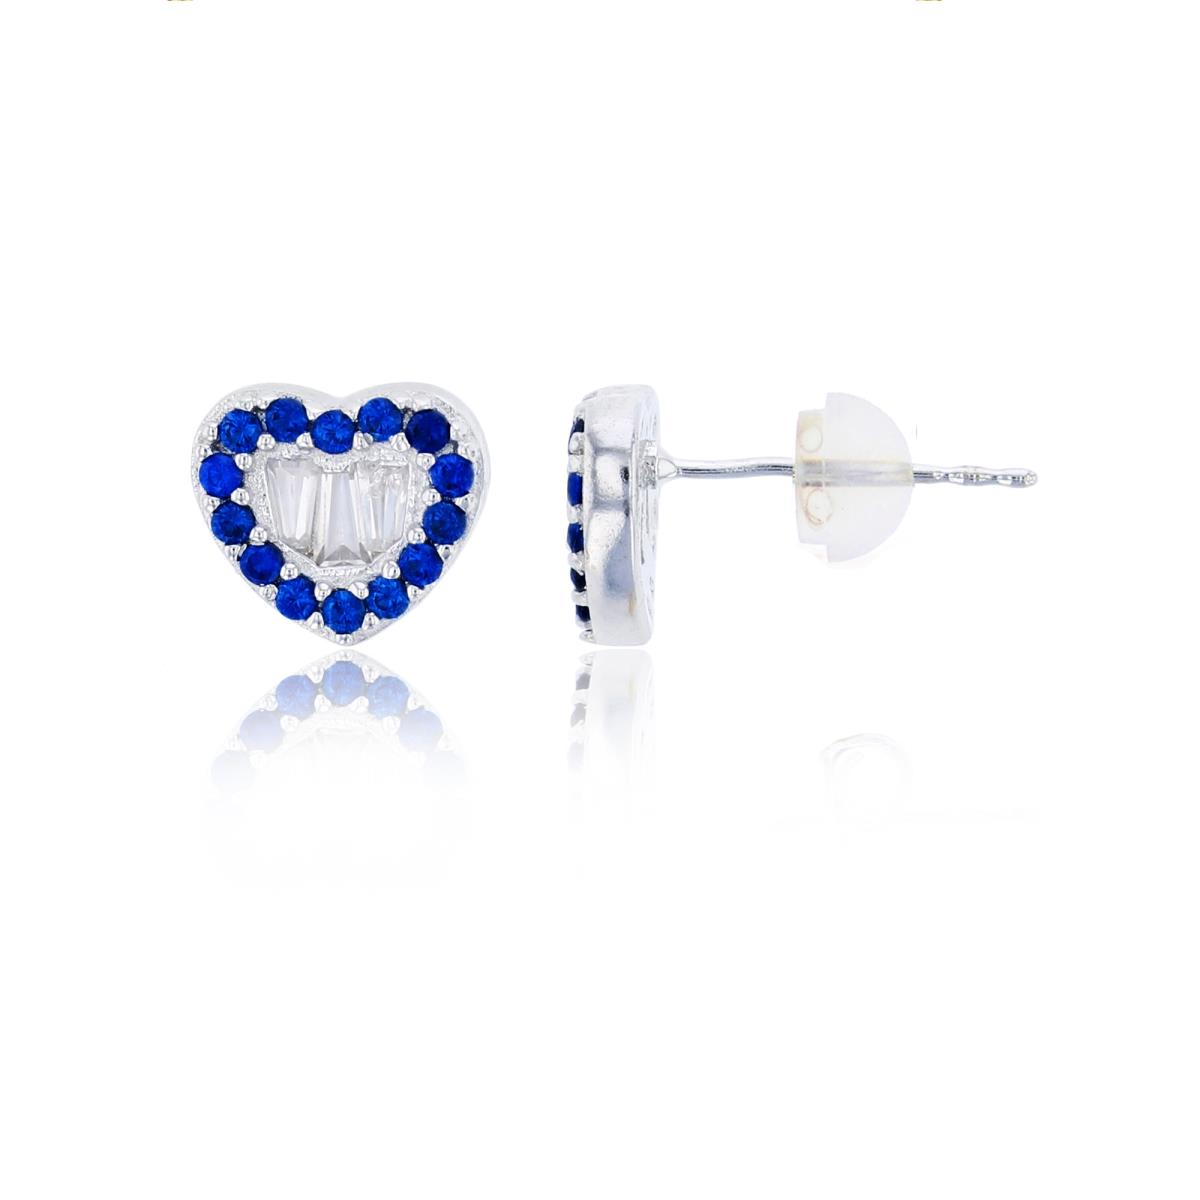 10K White Gold 7x8mm Micropave Sapphire Rd Cut & White Baguette CZ Heart Stud Earring with Silicone Back 